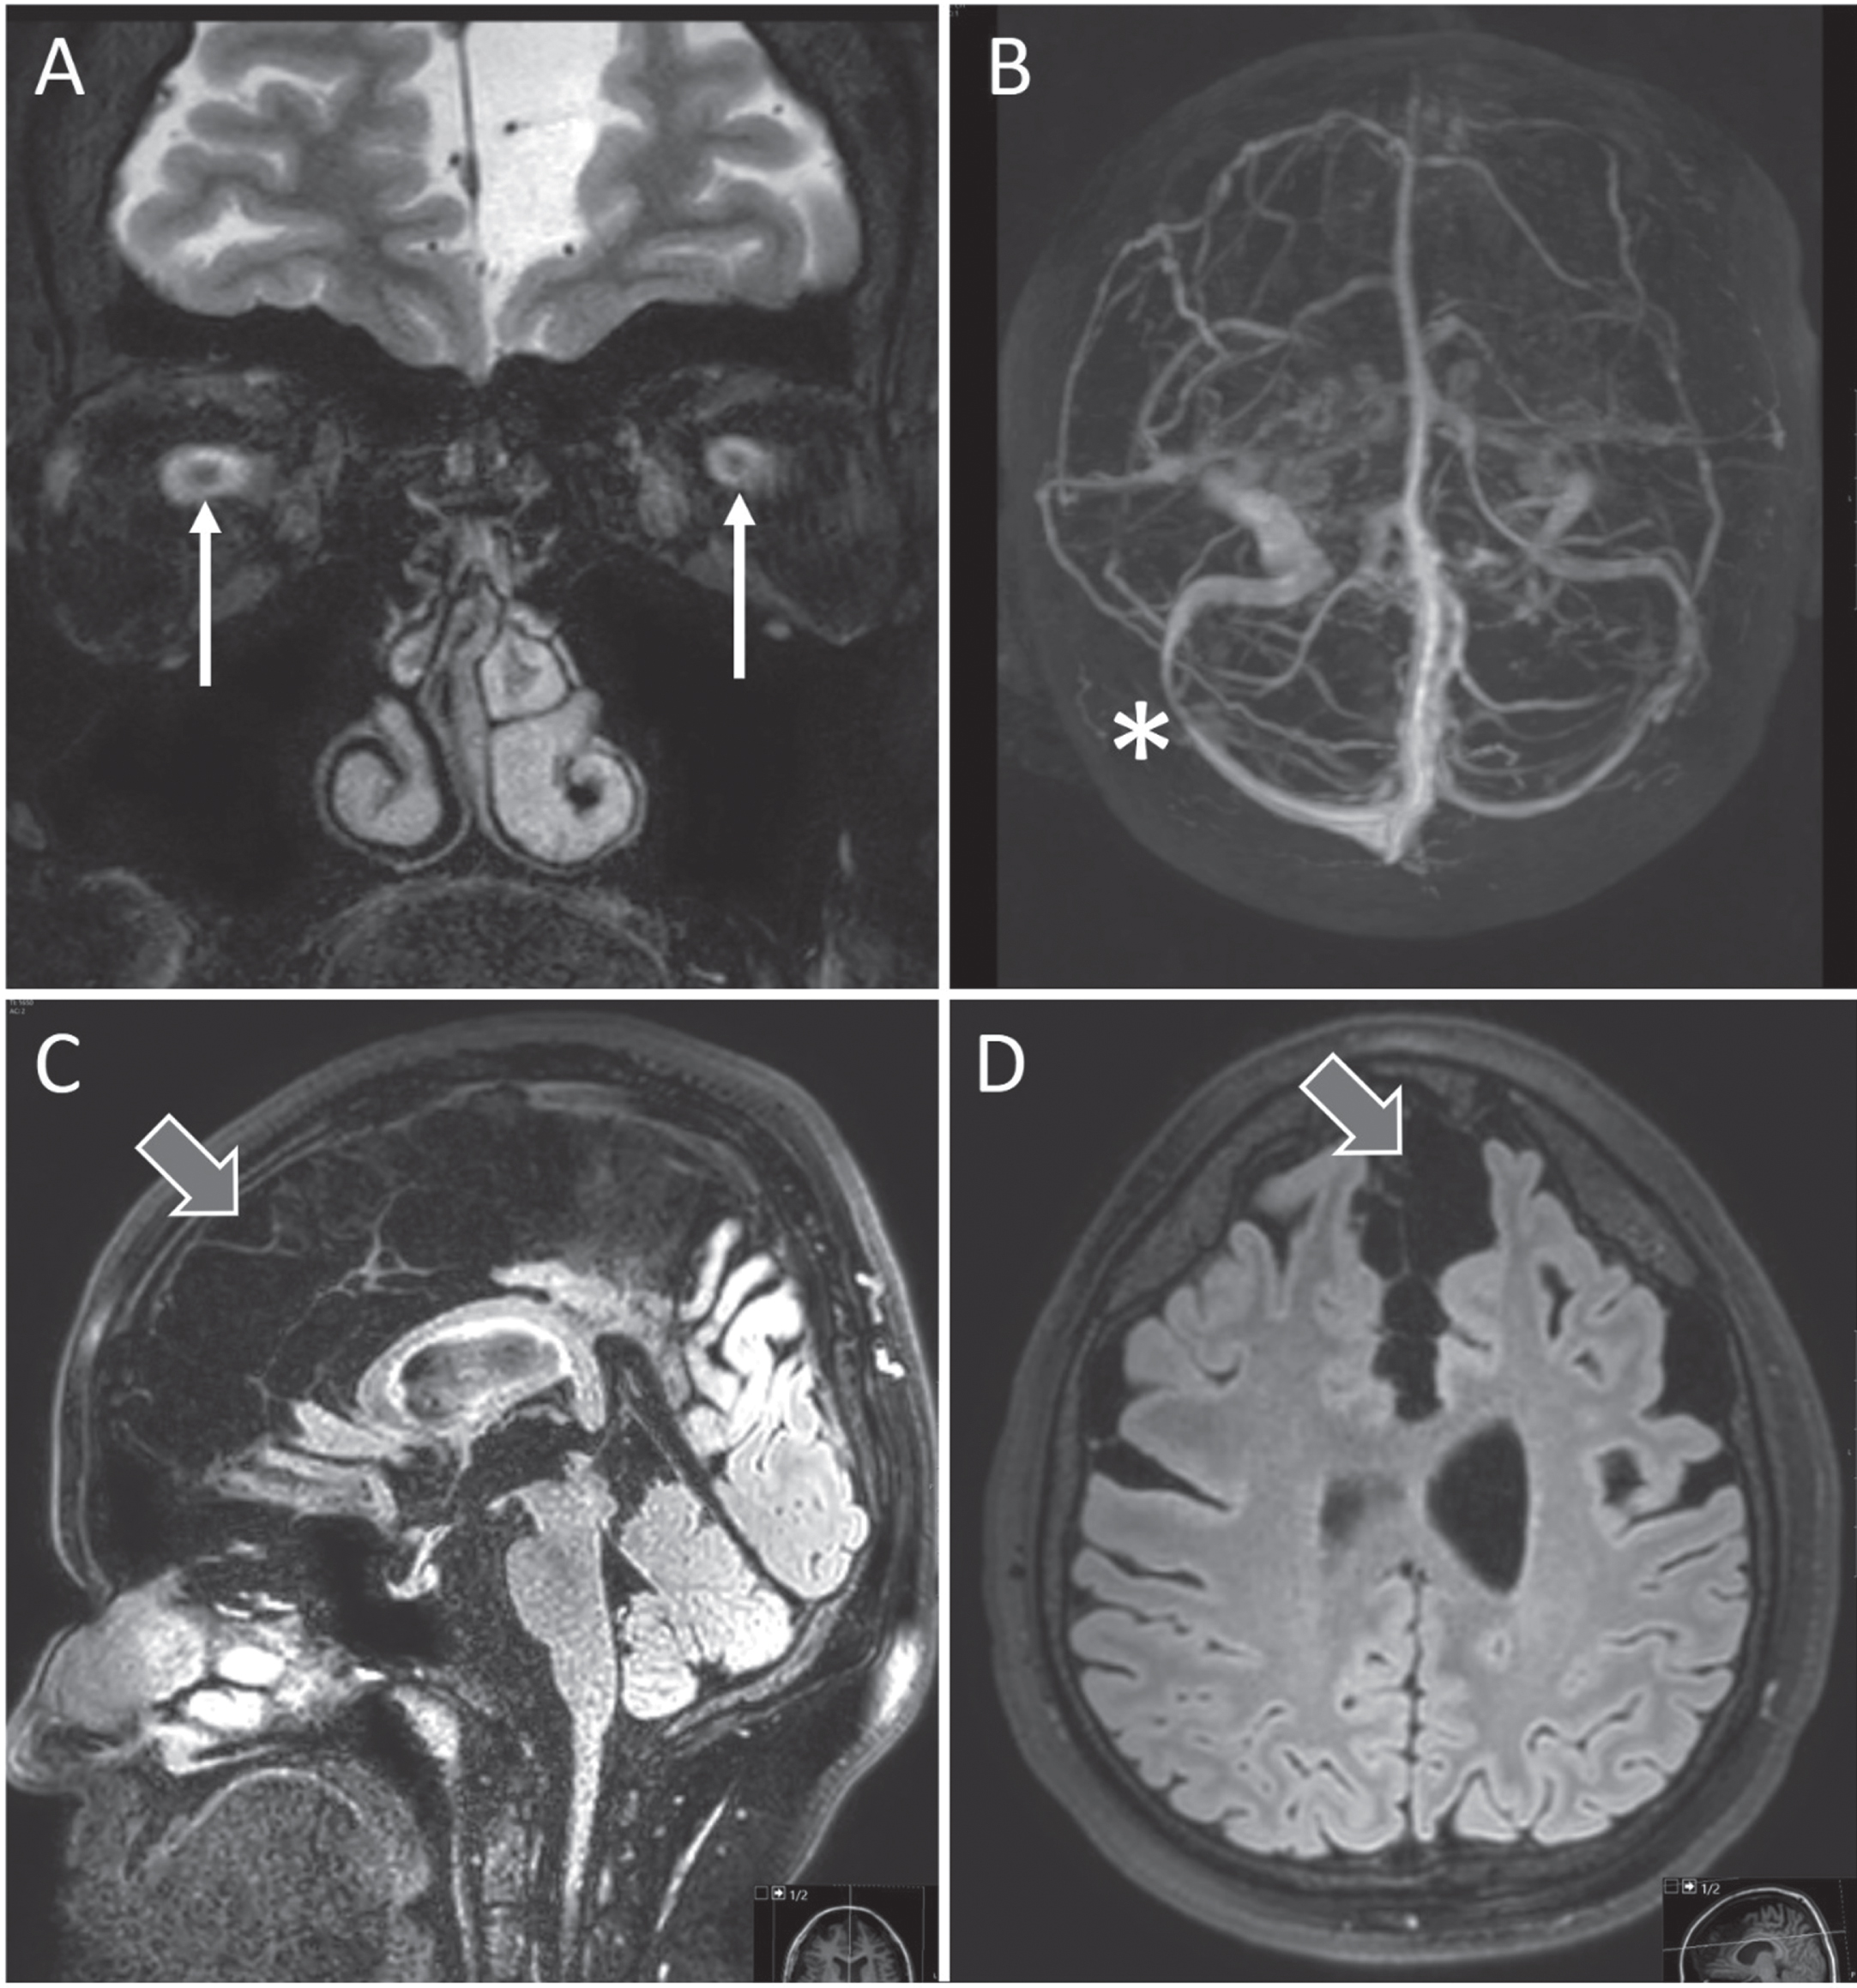 MRI showing classic signs of intracranial hypertension with prominent optic discs (arrows in A), sinus stenosis (asterisk in B) and flattening of pituitary gland (C). Note extensive subarachnoid cysts with local space-occupying appearance (block arrows in C and D). Written consent to publish these images was obtained from the patient.